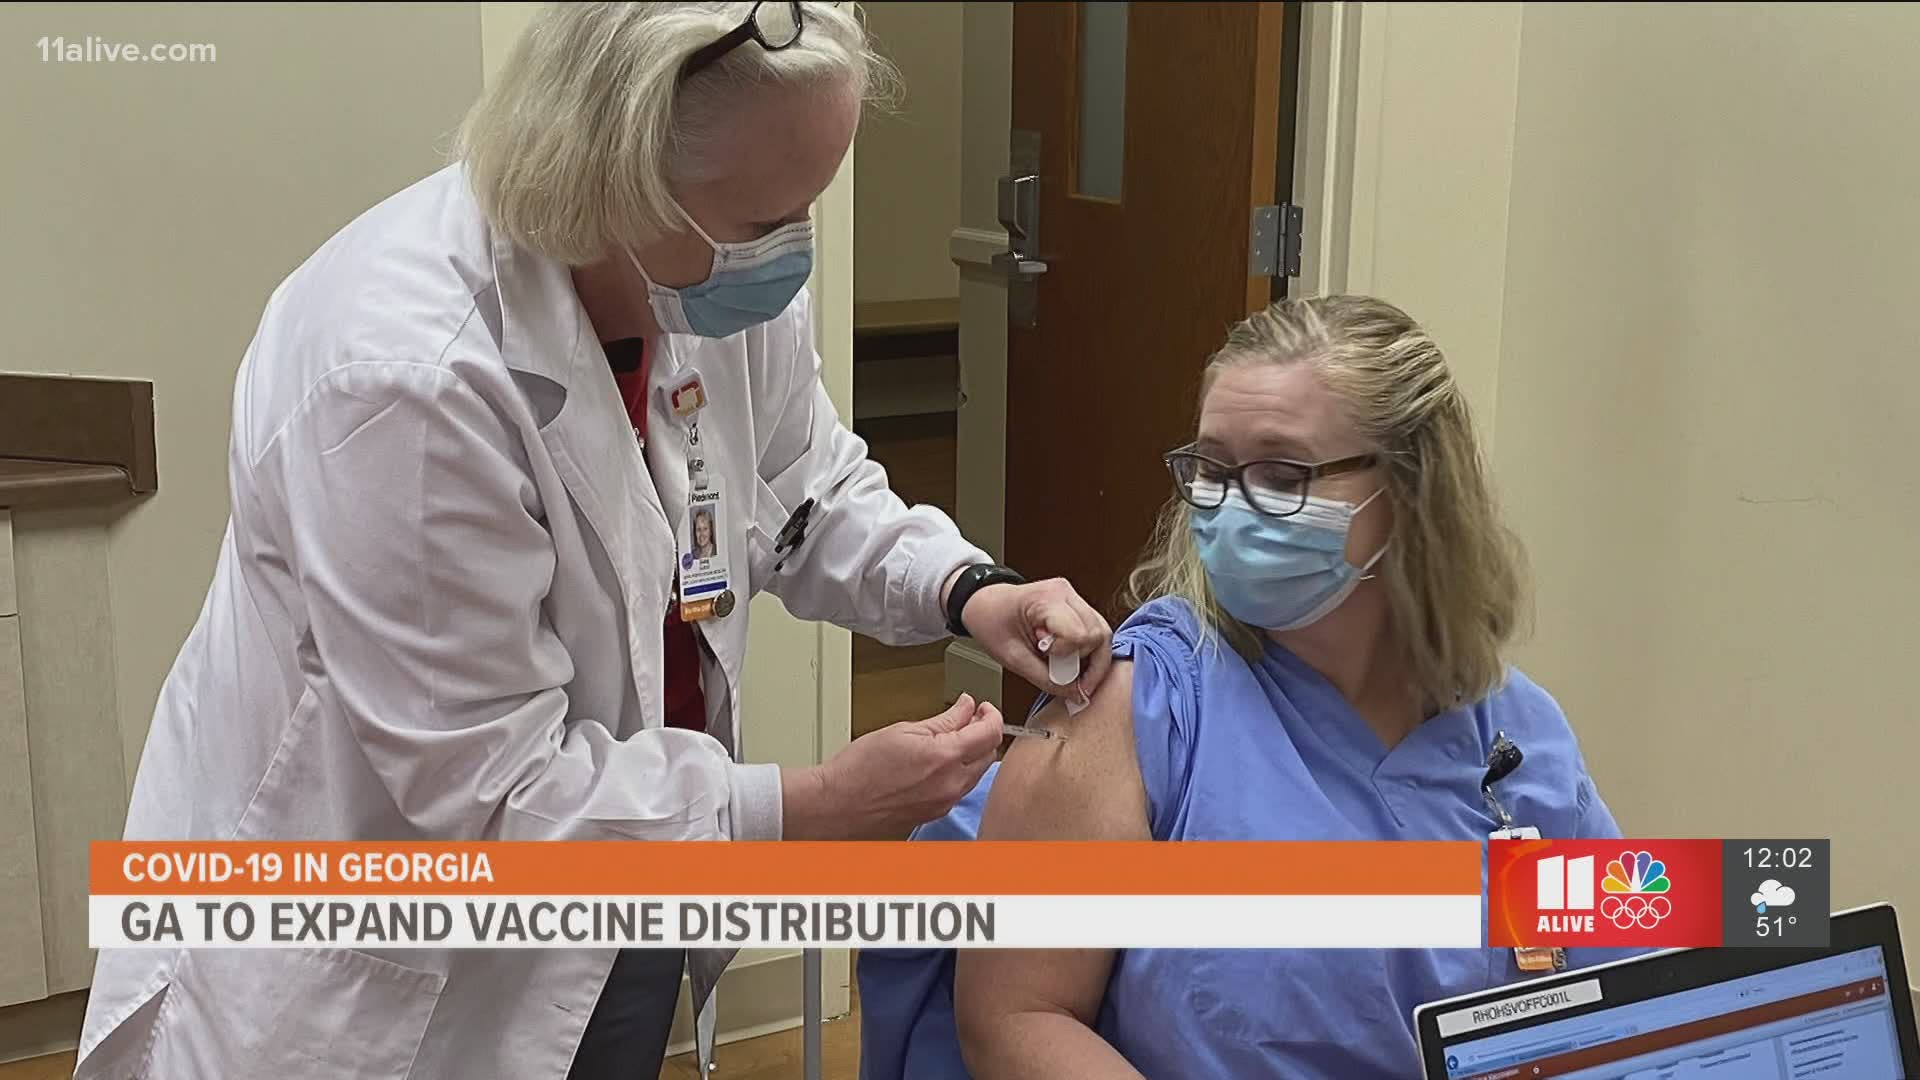 Here's the latest on the vaccine effort in Georgia.